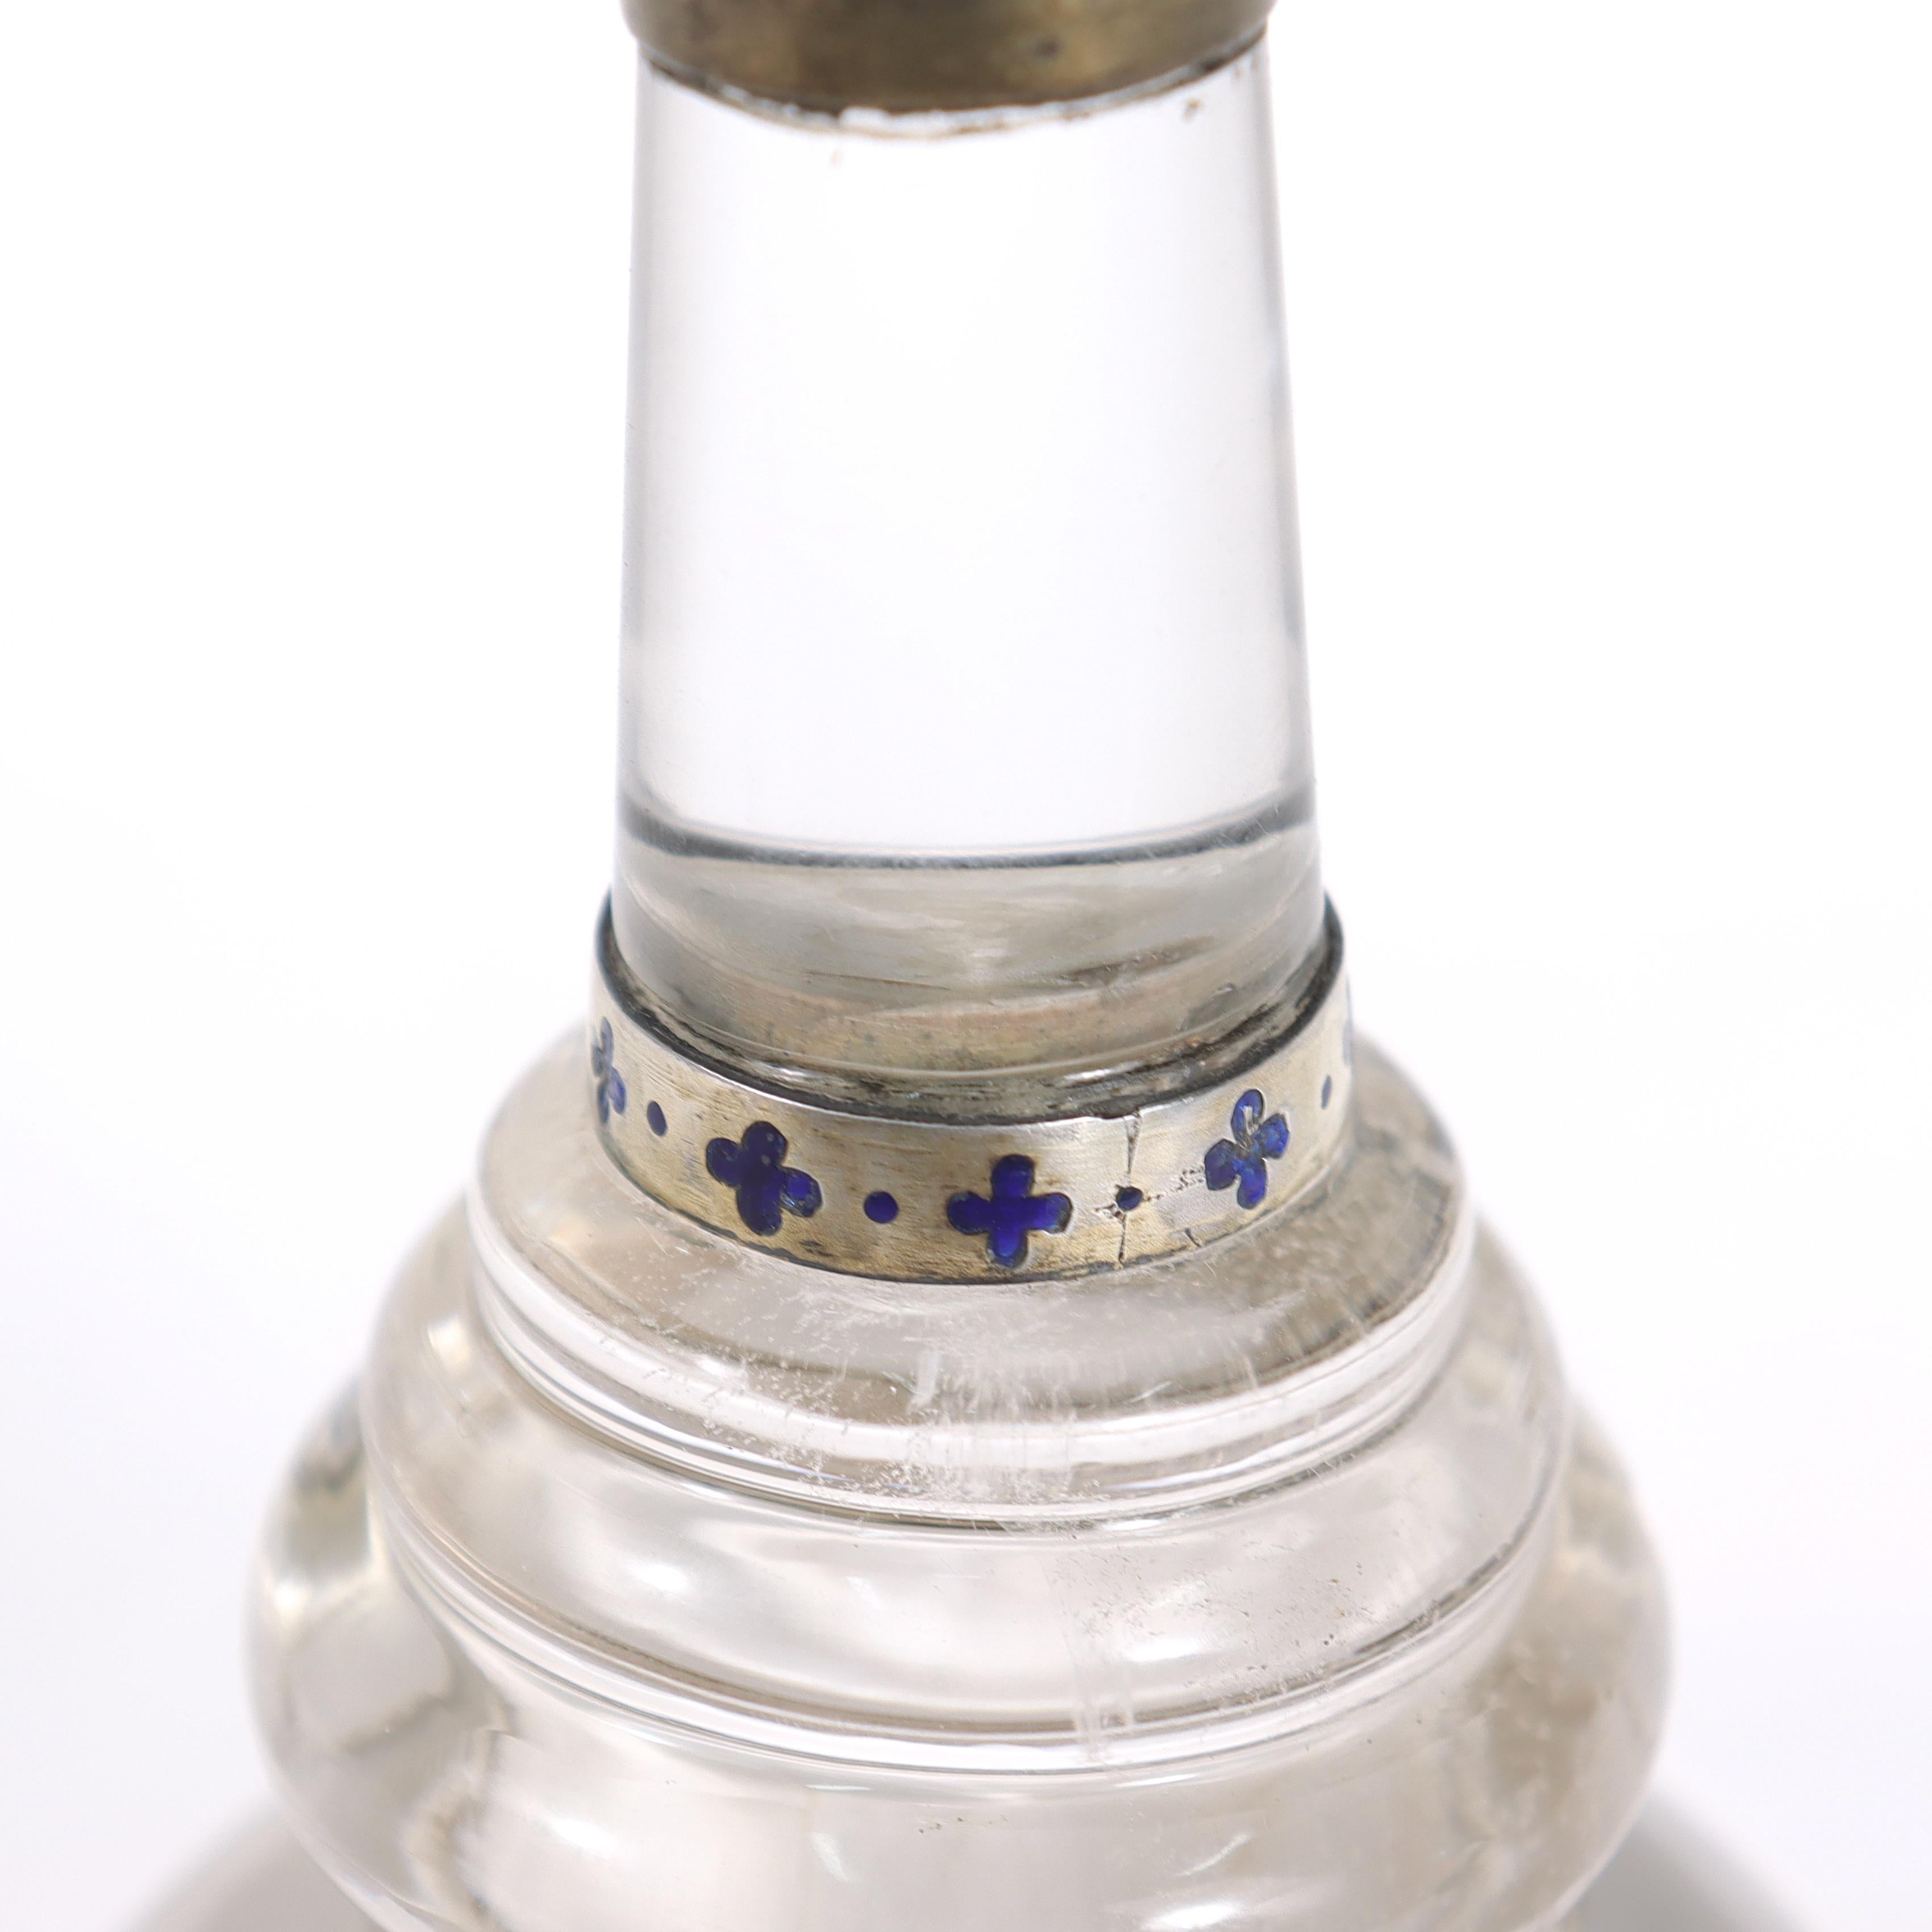 Antique Austrian Rock Crystal, Silver, and Blue Enamel Pricket Candlestick For Sale 5